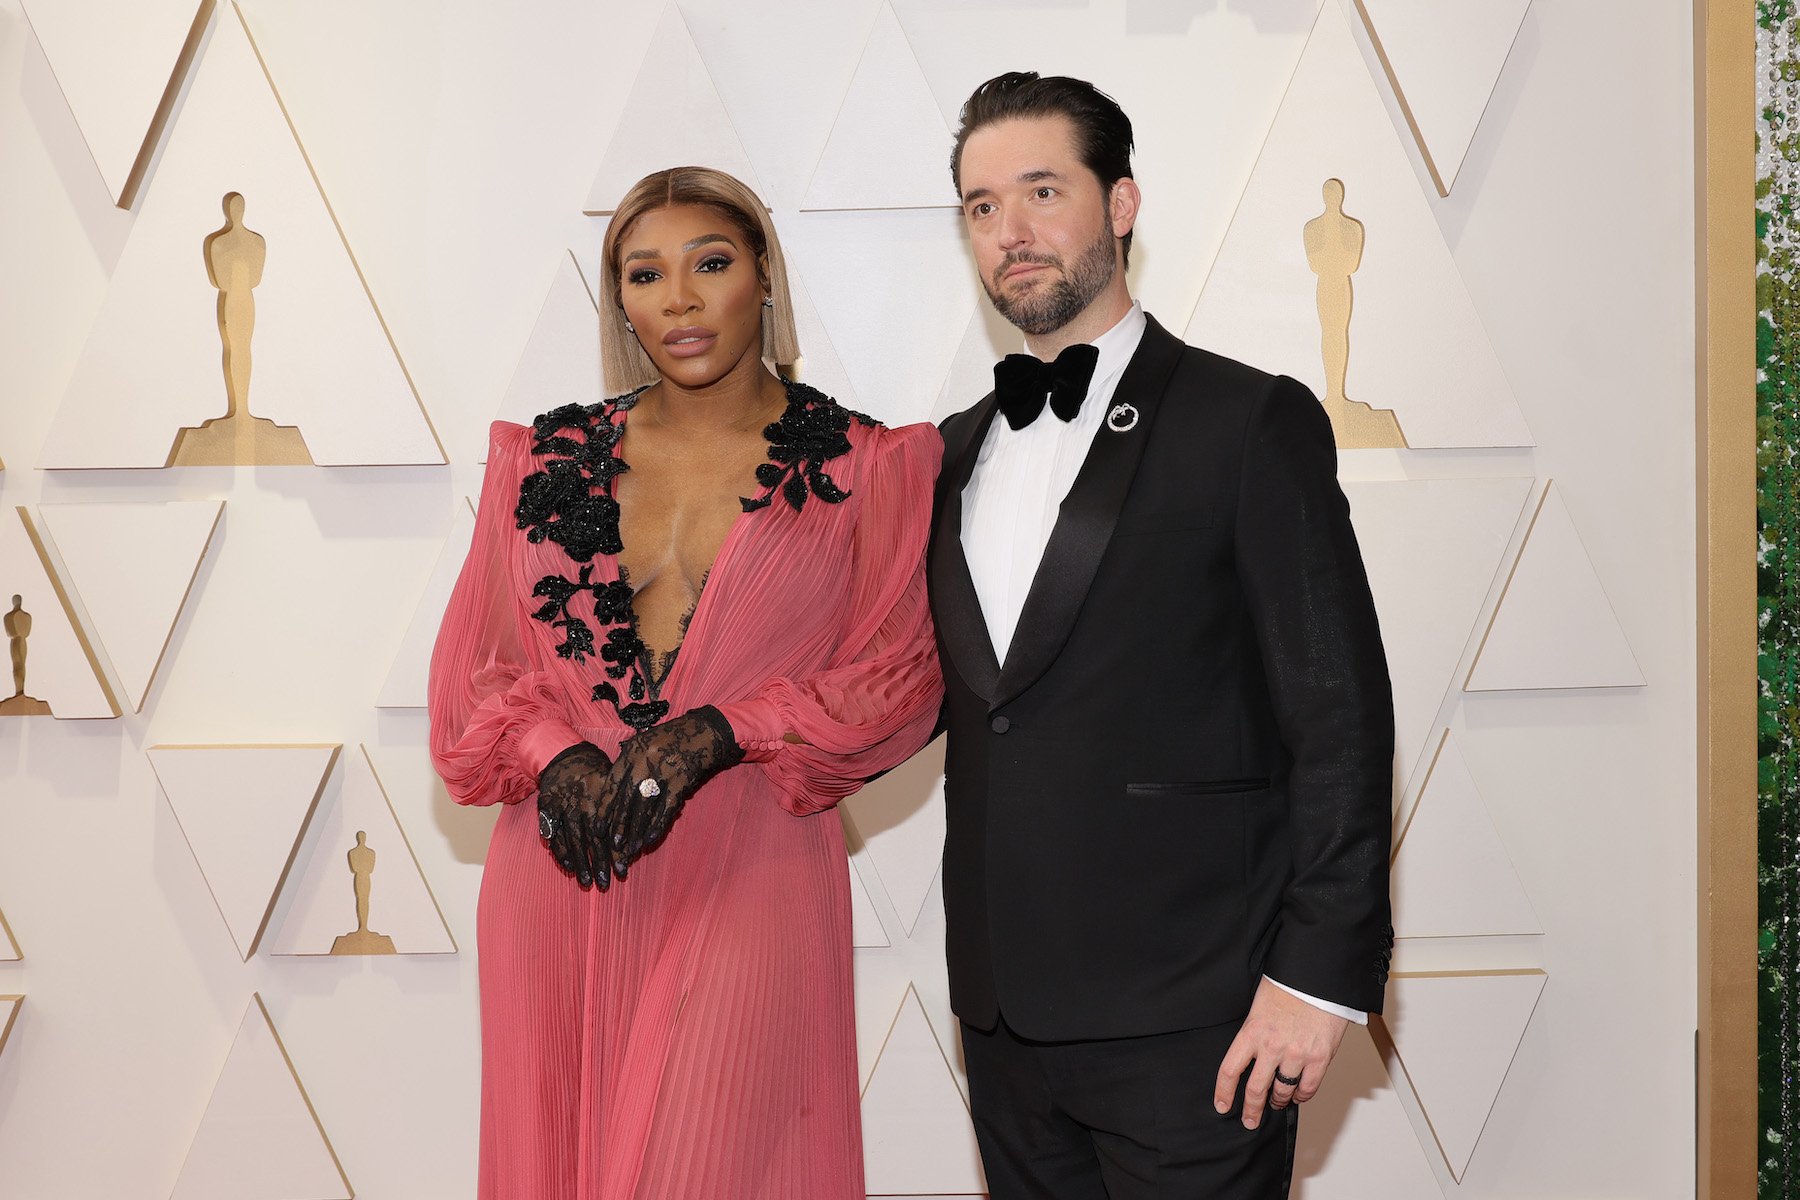 Serena Williams and Alexis Ohanian, the latter of which was called a groupie by Drake